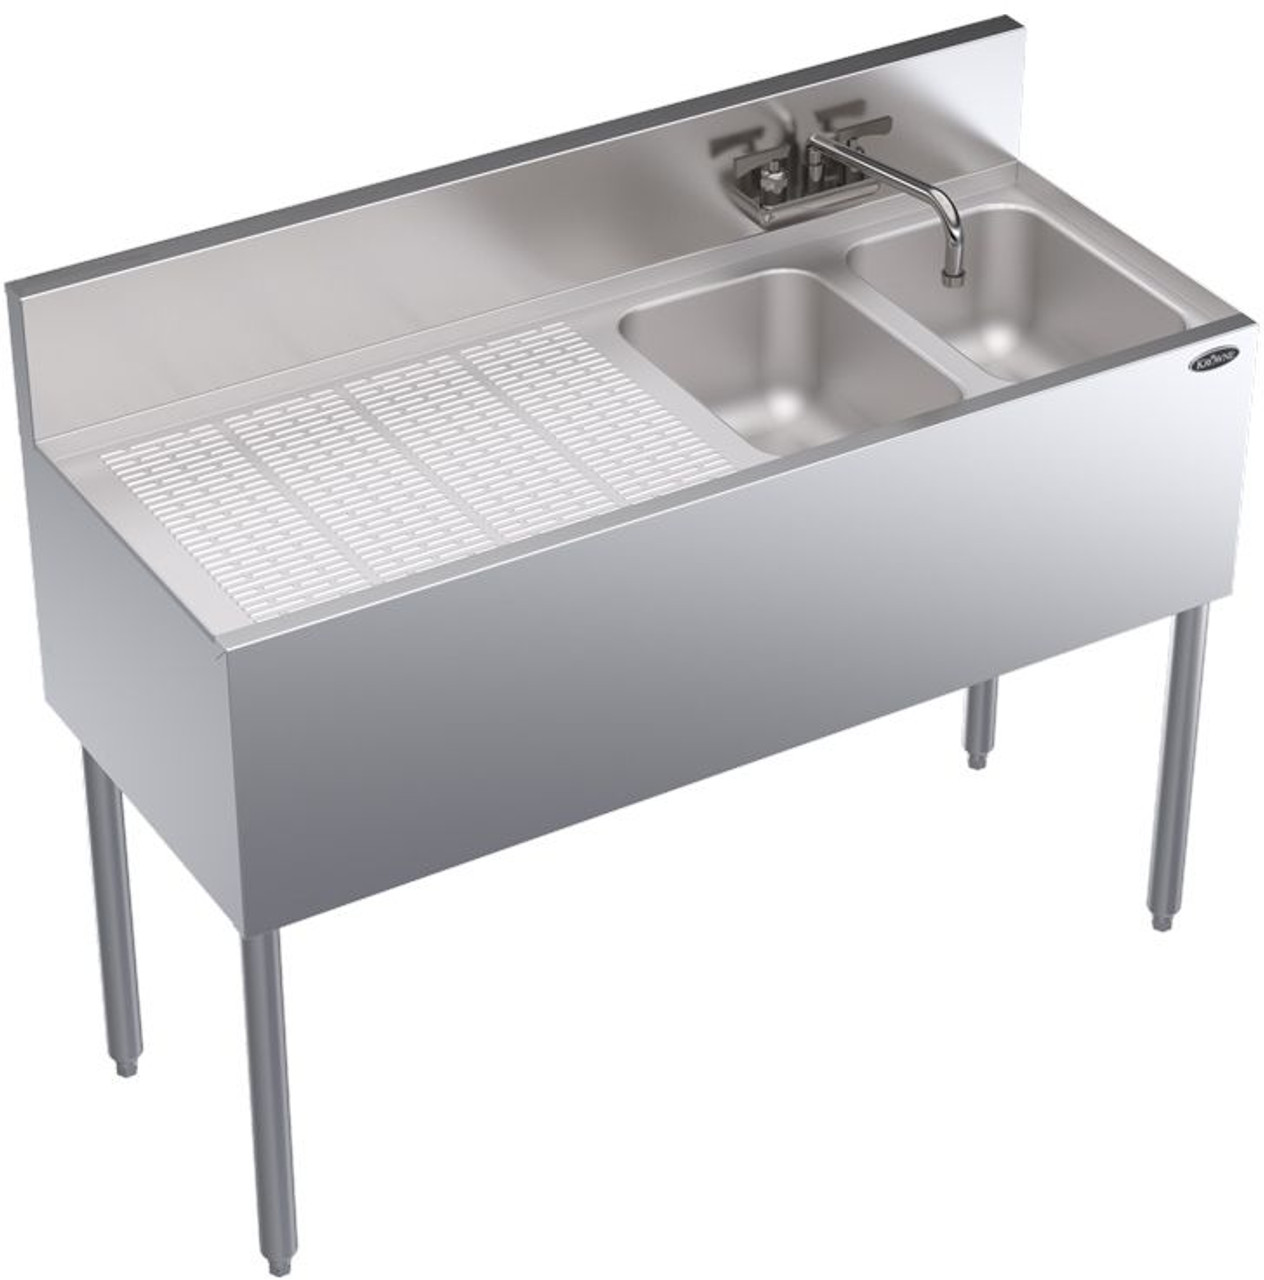 Krowne KR19-42R Two Compartment Underbar Sink with Left Drainboard - 48"